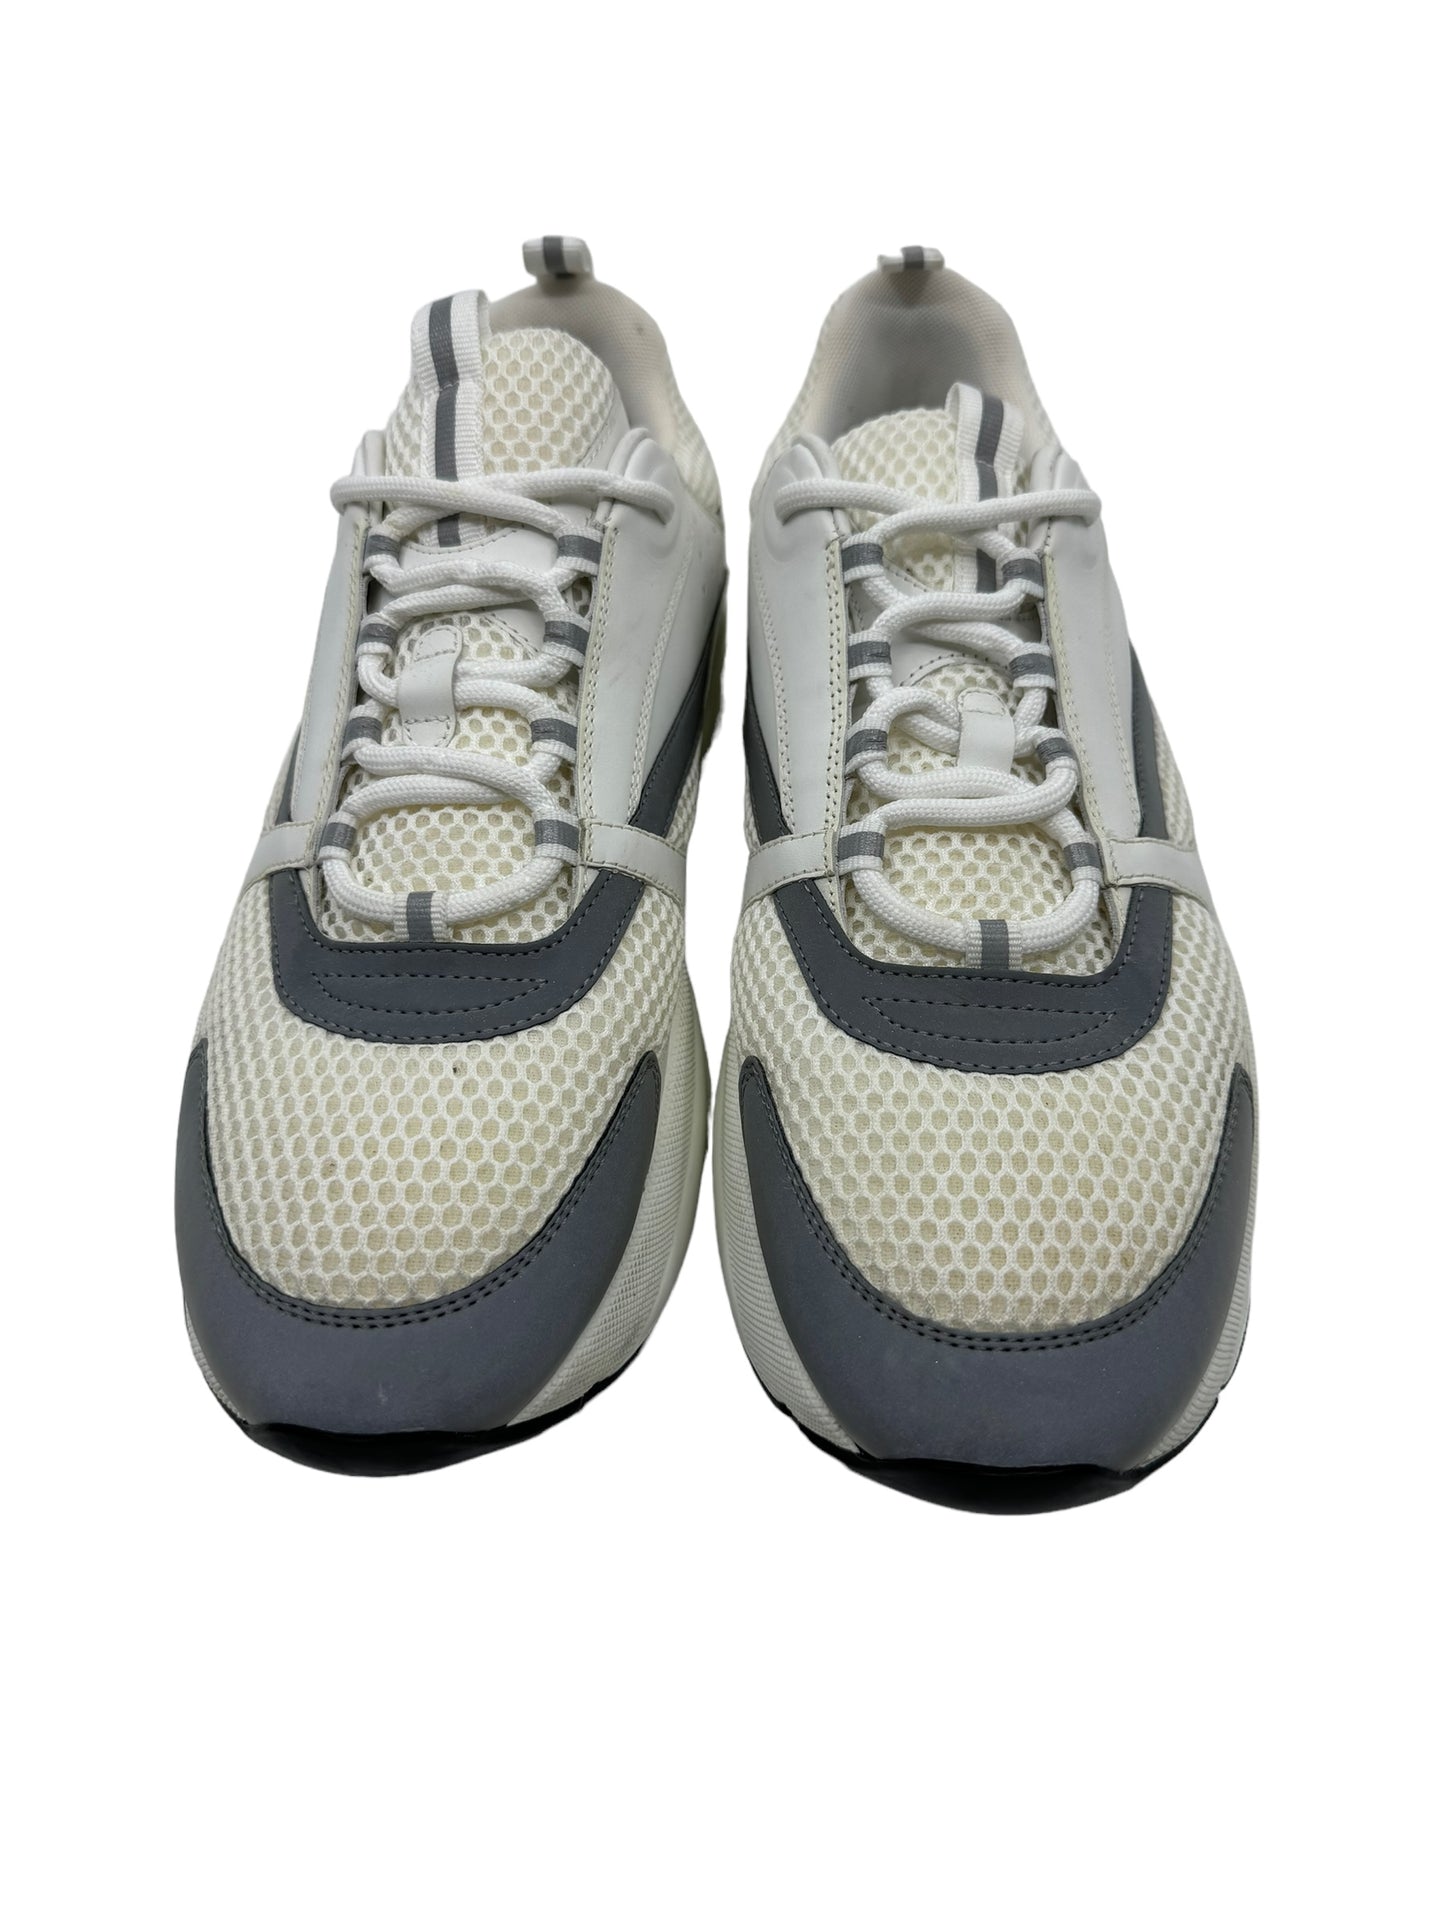 Dior B22 Trainer White Pre-owned Size 46